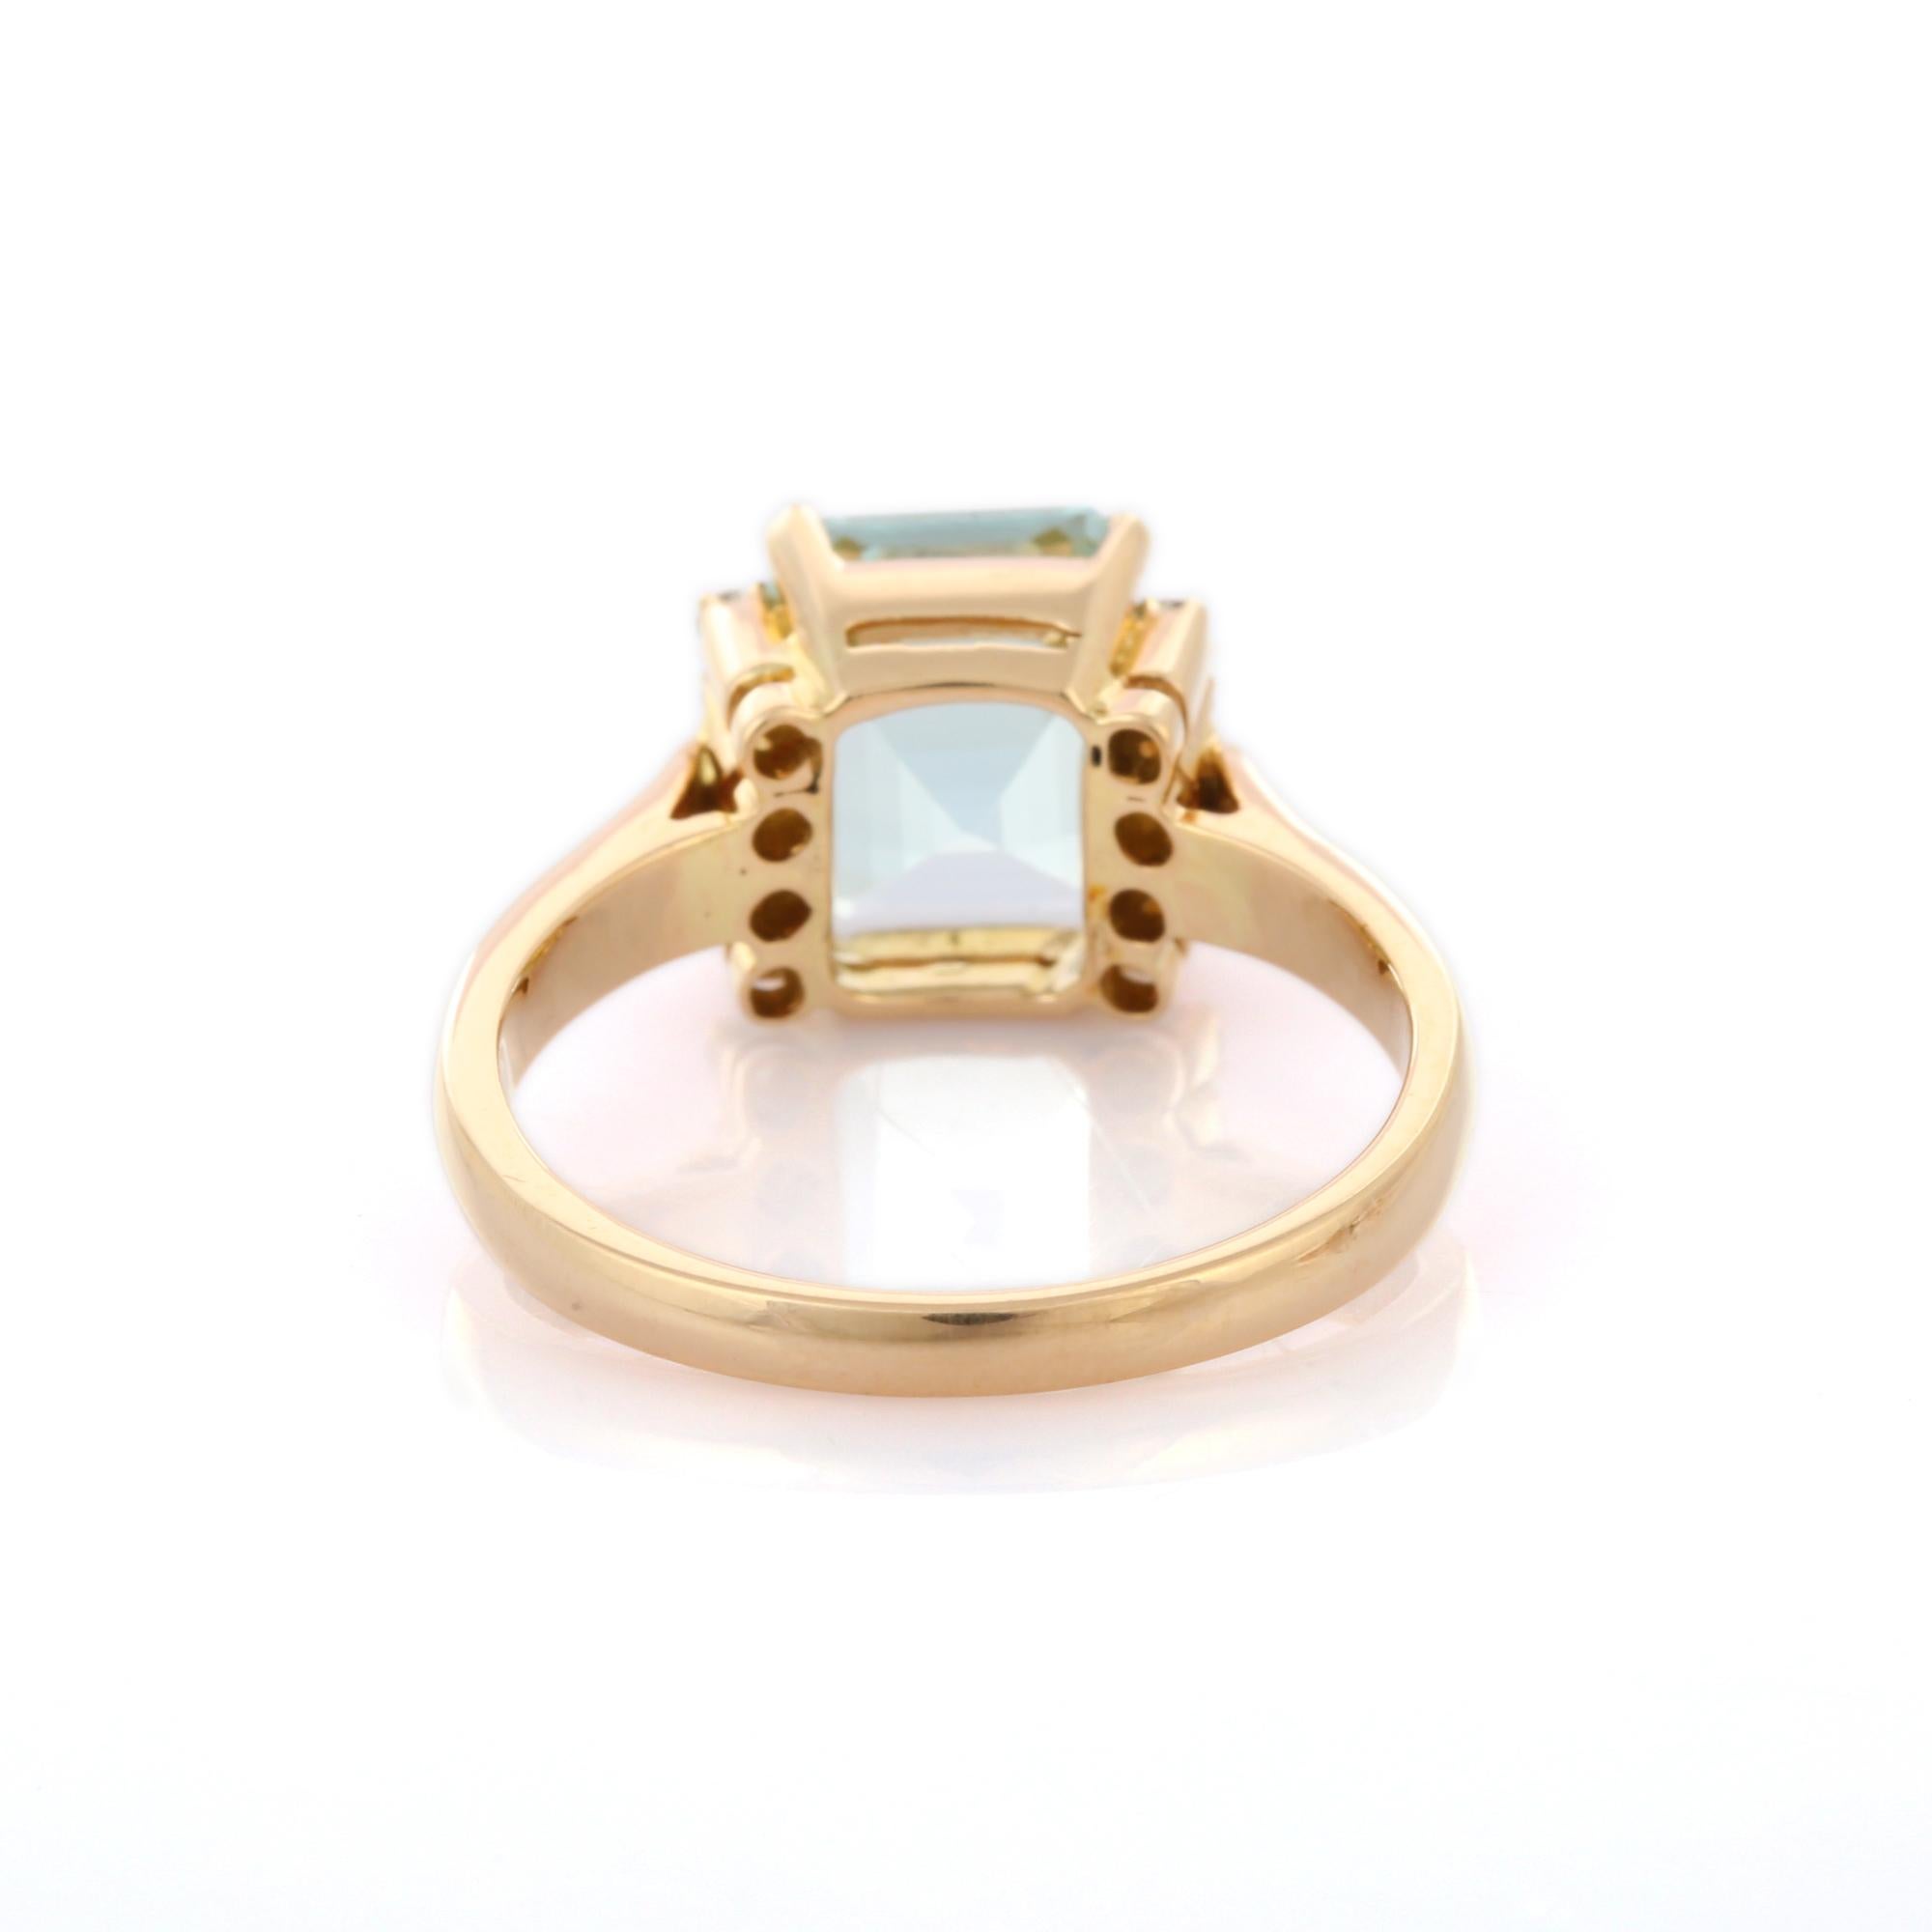 For Sale:  Octagon Cut 2.65 ct Aquamarine Cocktail Ring in 18K Yellow Gold with Diamonds  6